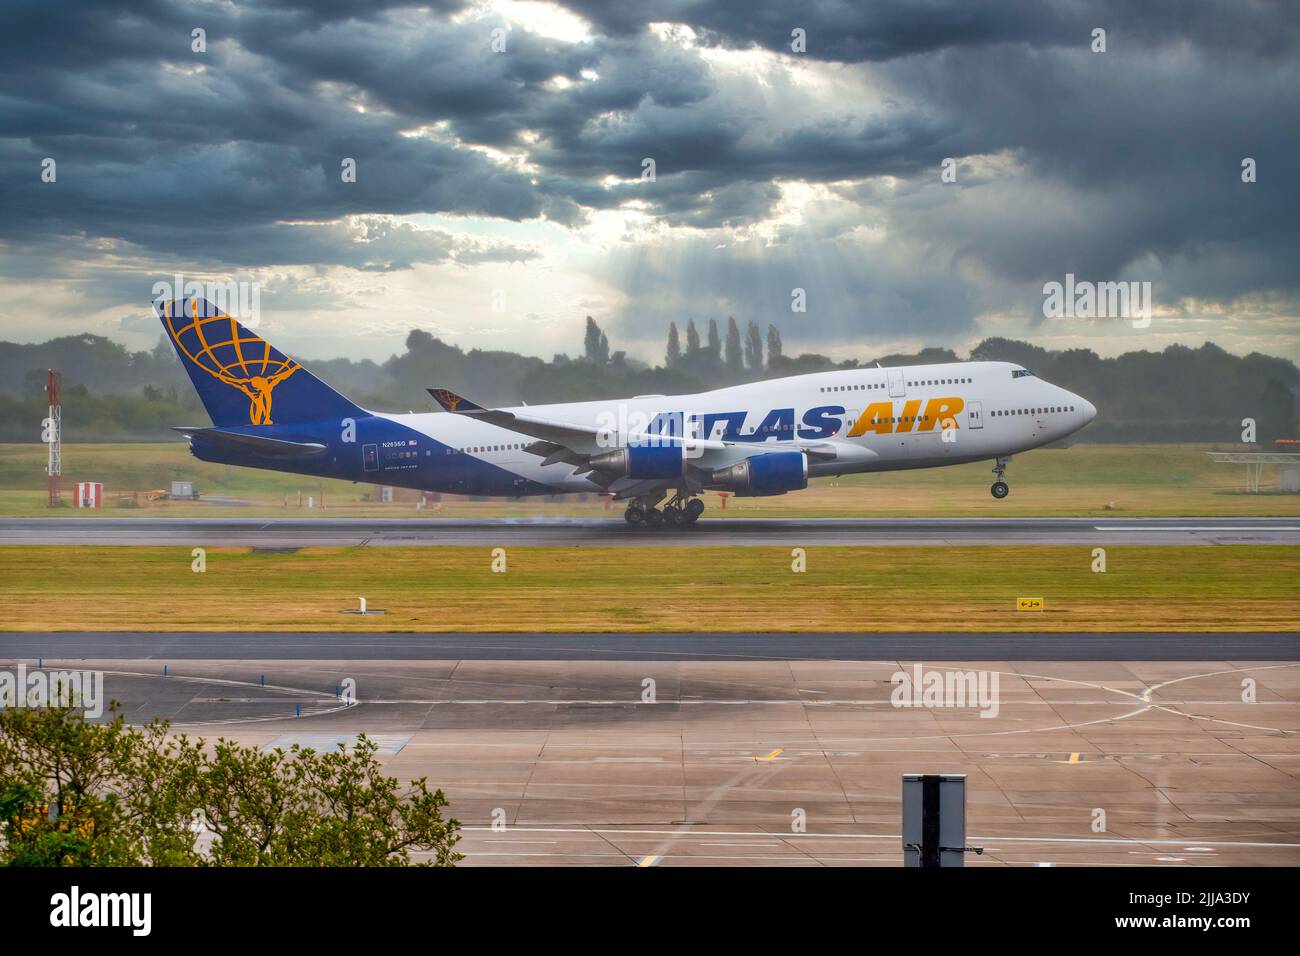 MANCHESTER, UNITED KINGDOM - JULY 24TH 2022: Atlas Air Boeing 747 aircraft on a rare visit to Manchester airport Stock Photo